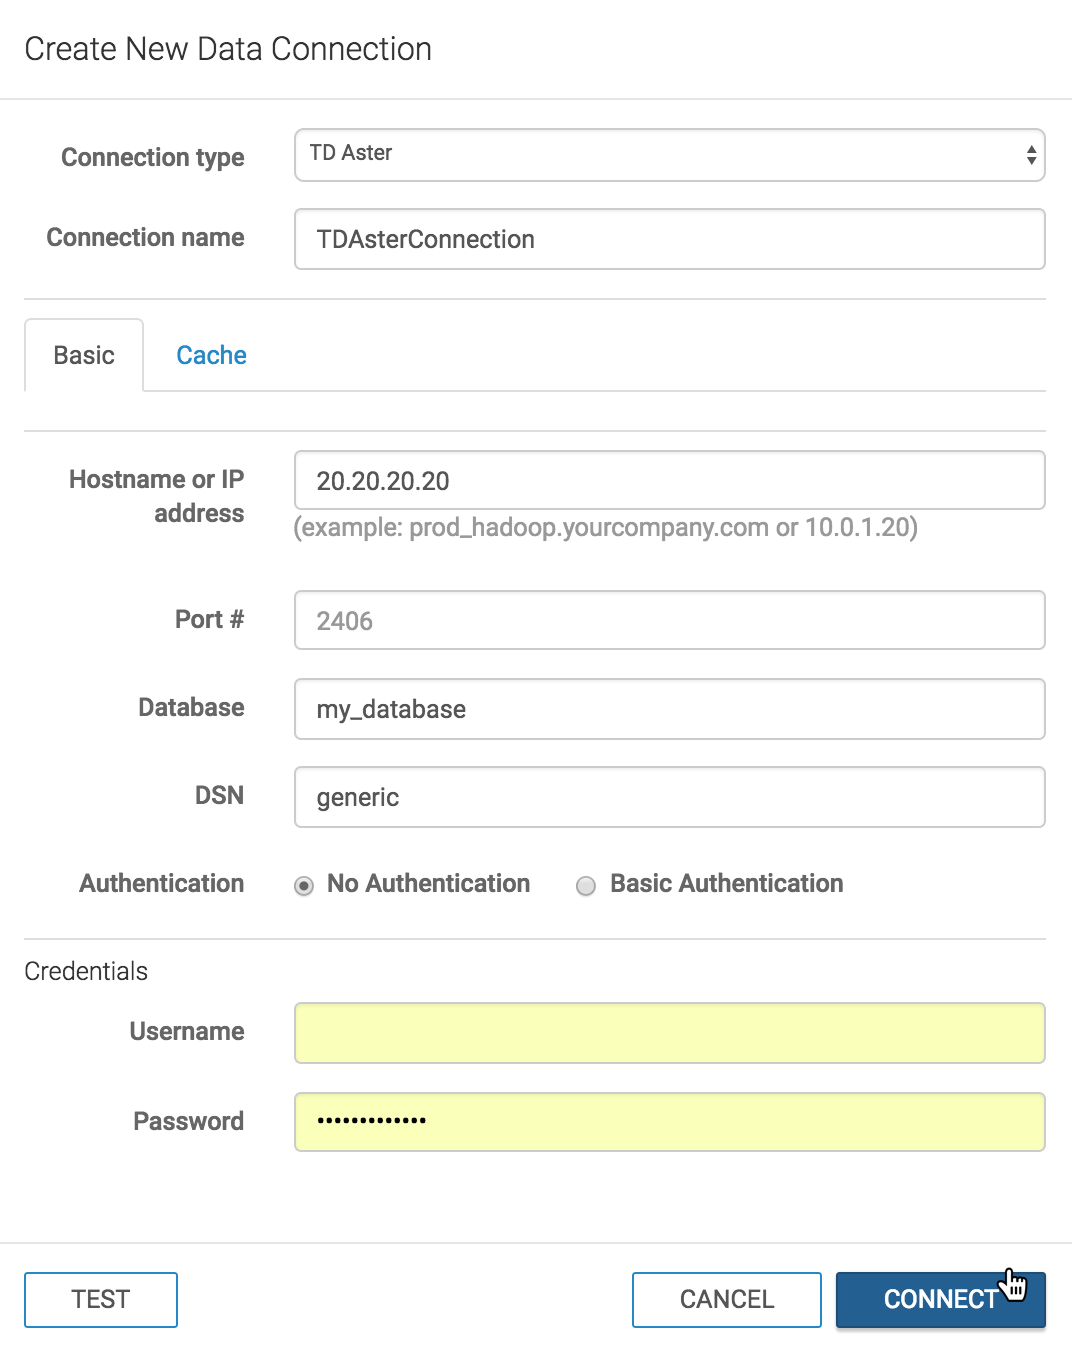 Create New Data Connection Modal Window: TD Aster